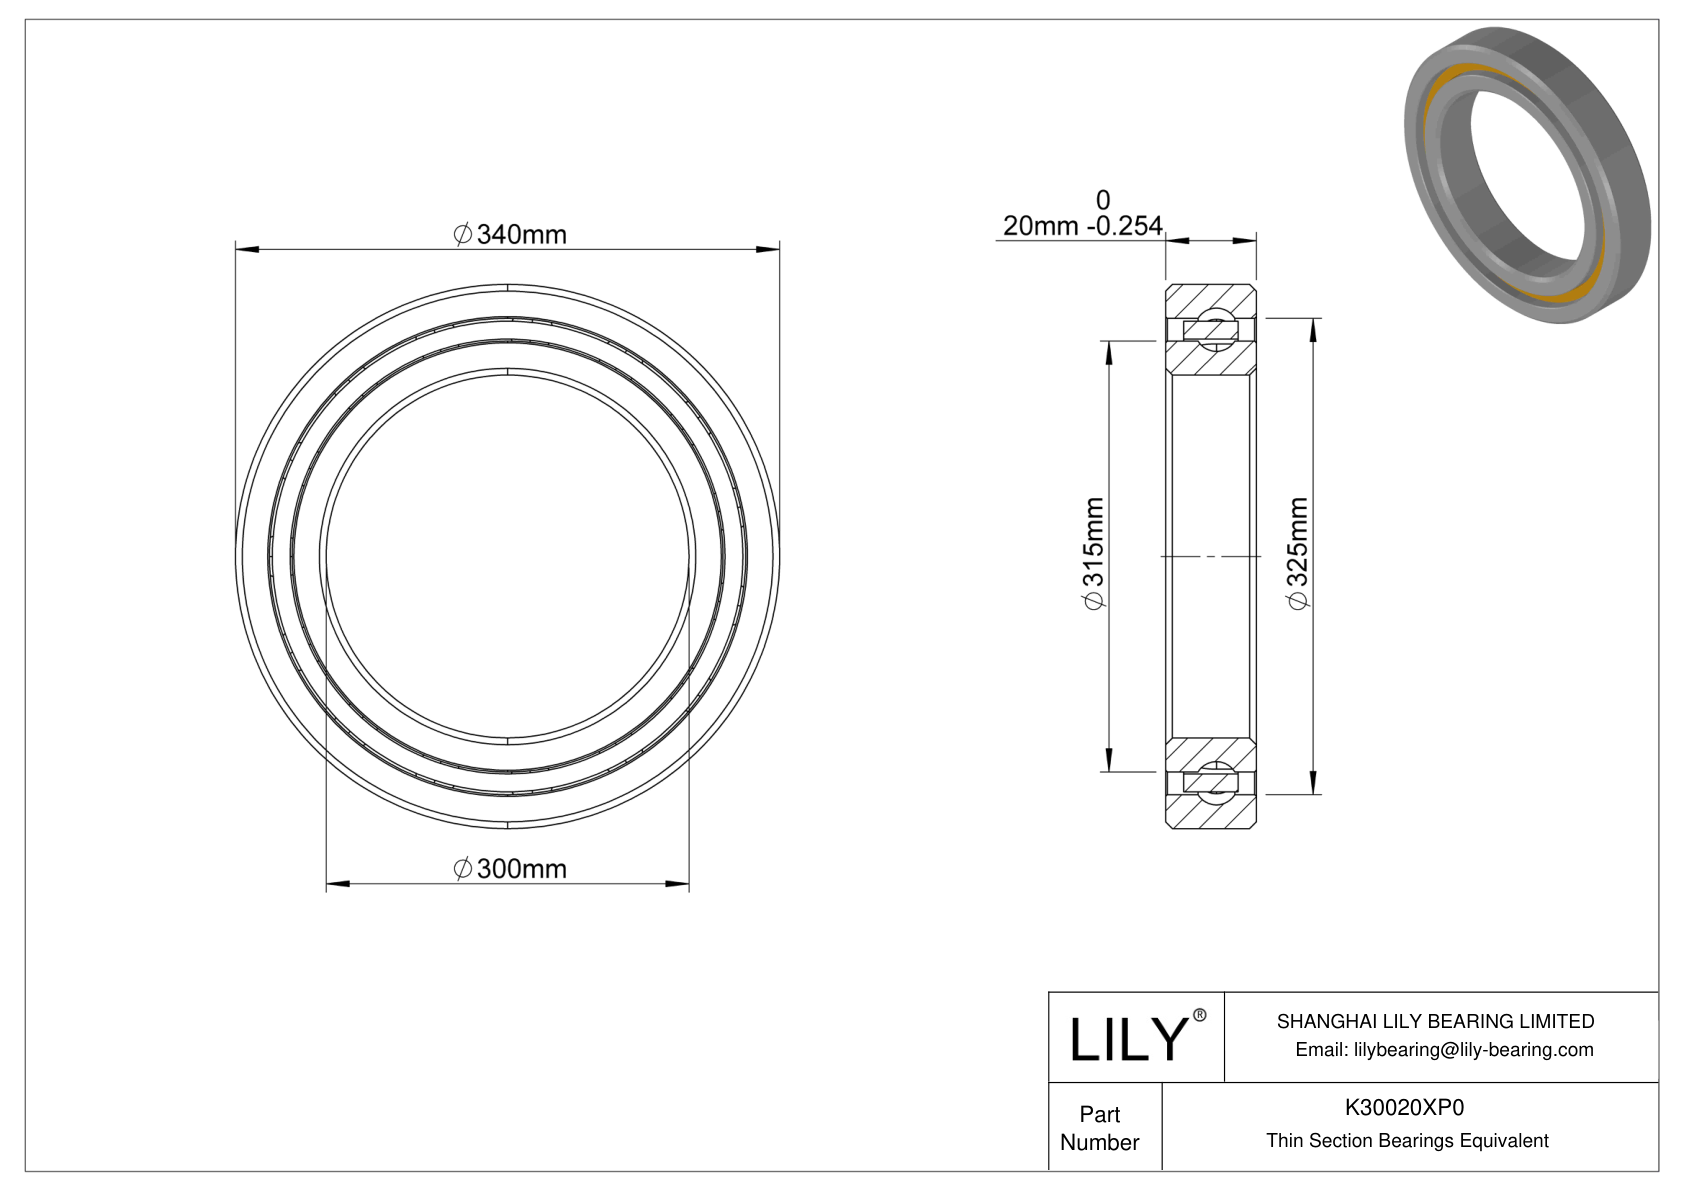 K30020XP0 Constant Section (CS) Bearings cad drawing